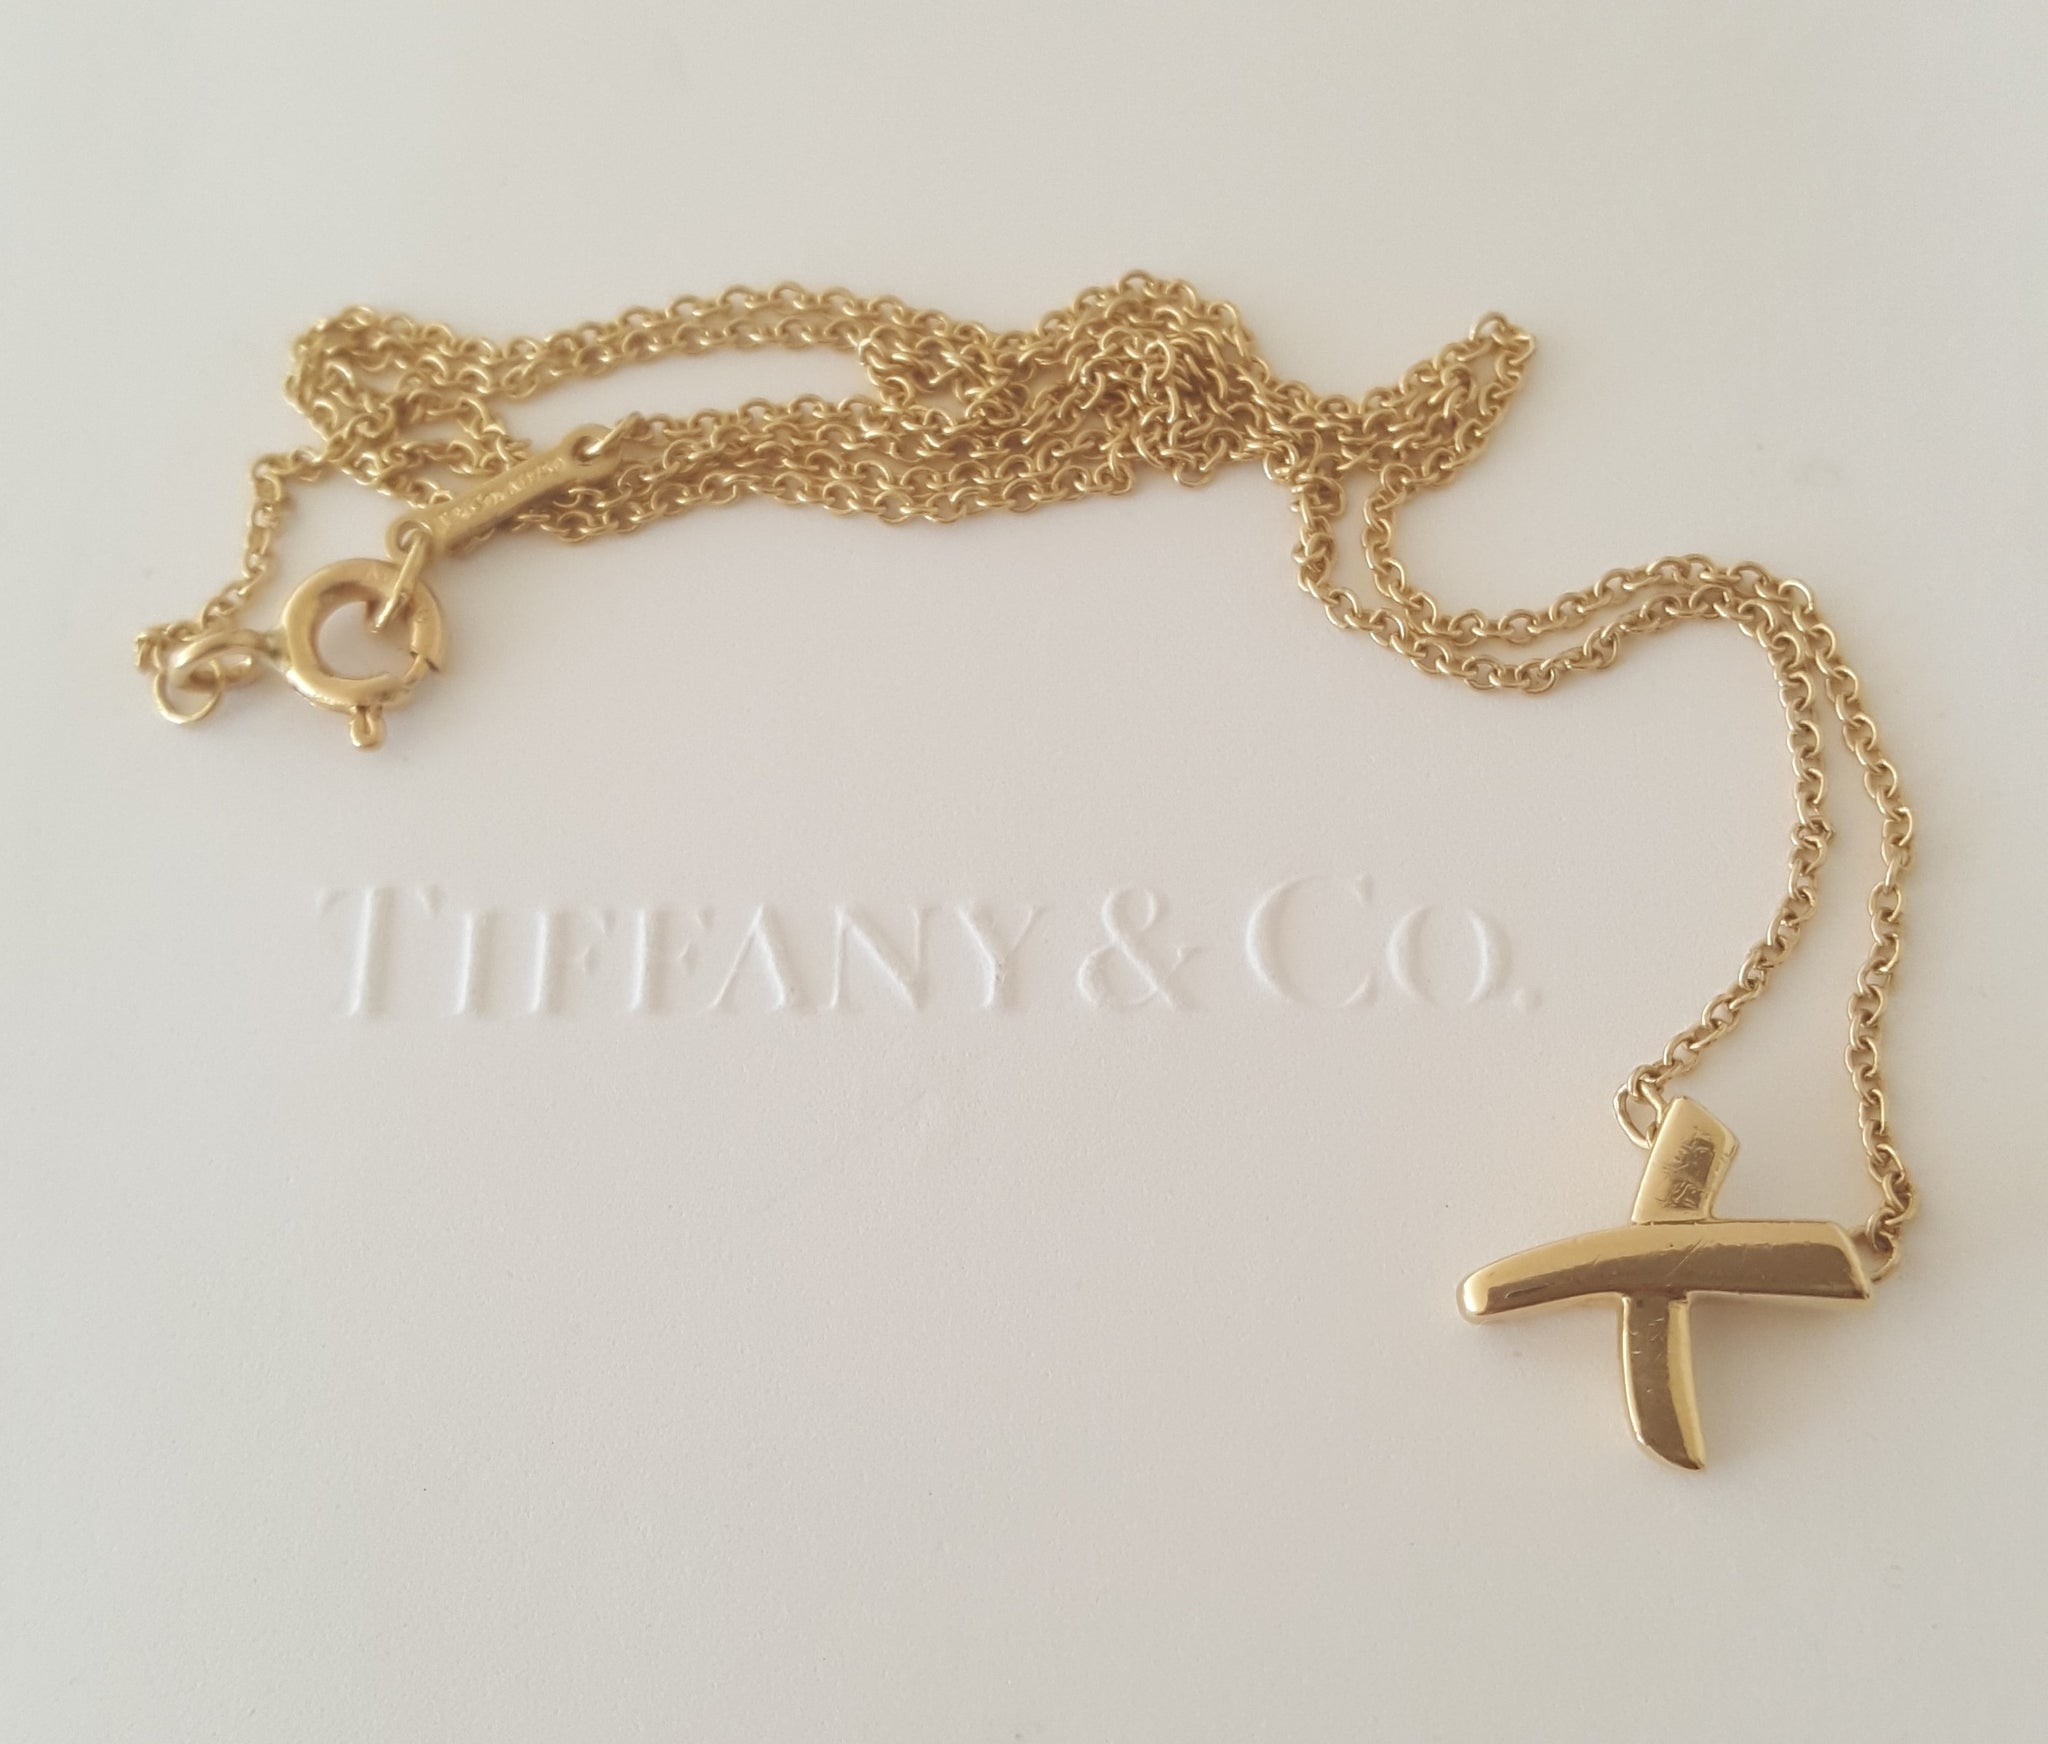 Tiffany & Co. Paloma Picasso Sterling Silver X Necklace | Tiffany & Co. |  Buy at TrueFacet